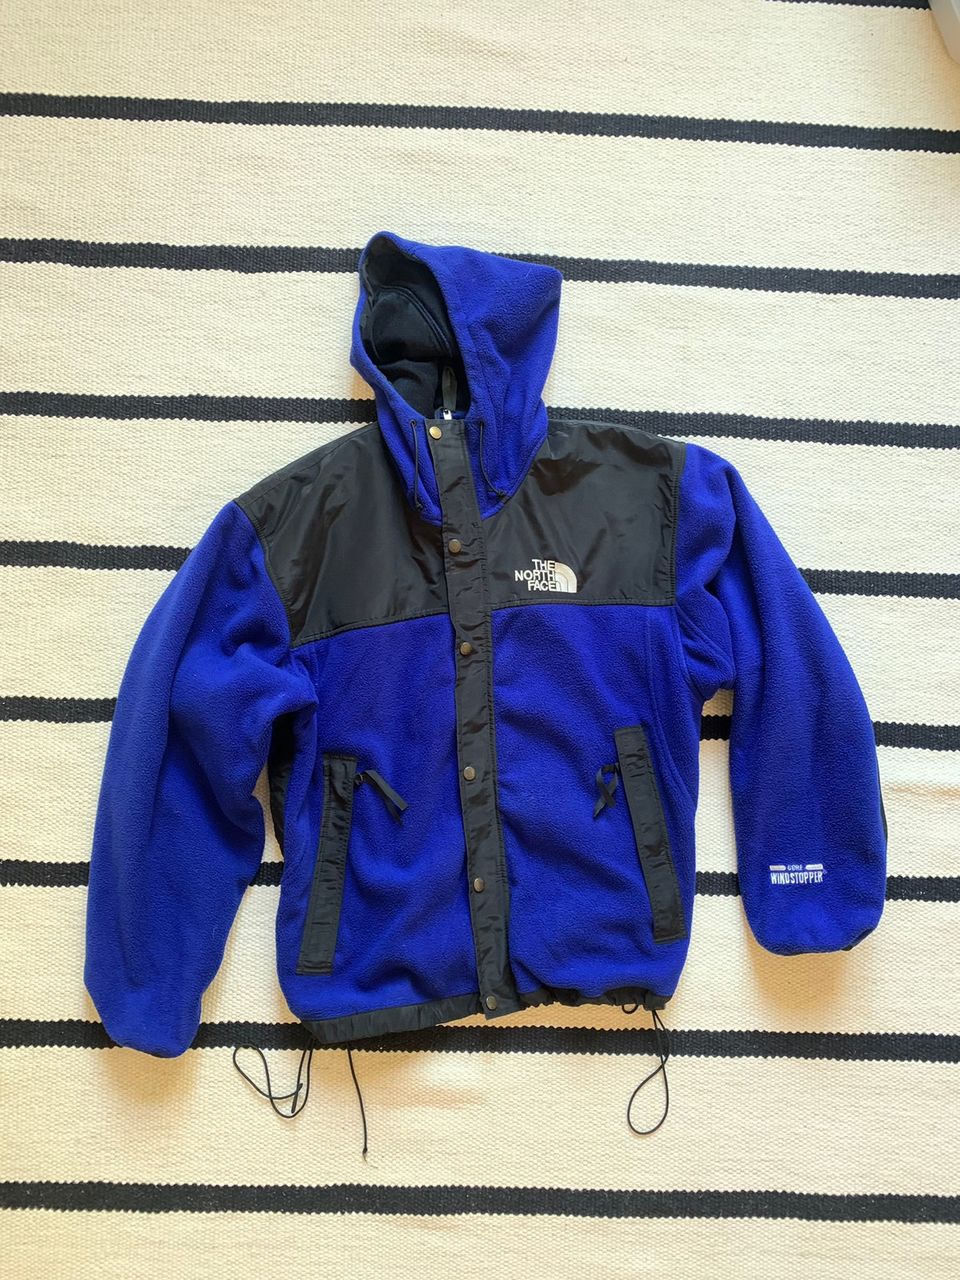 Vintage The North Face Gore Windstopper